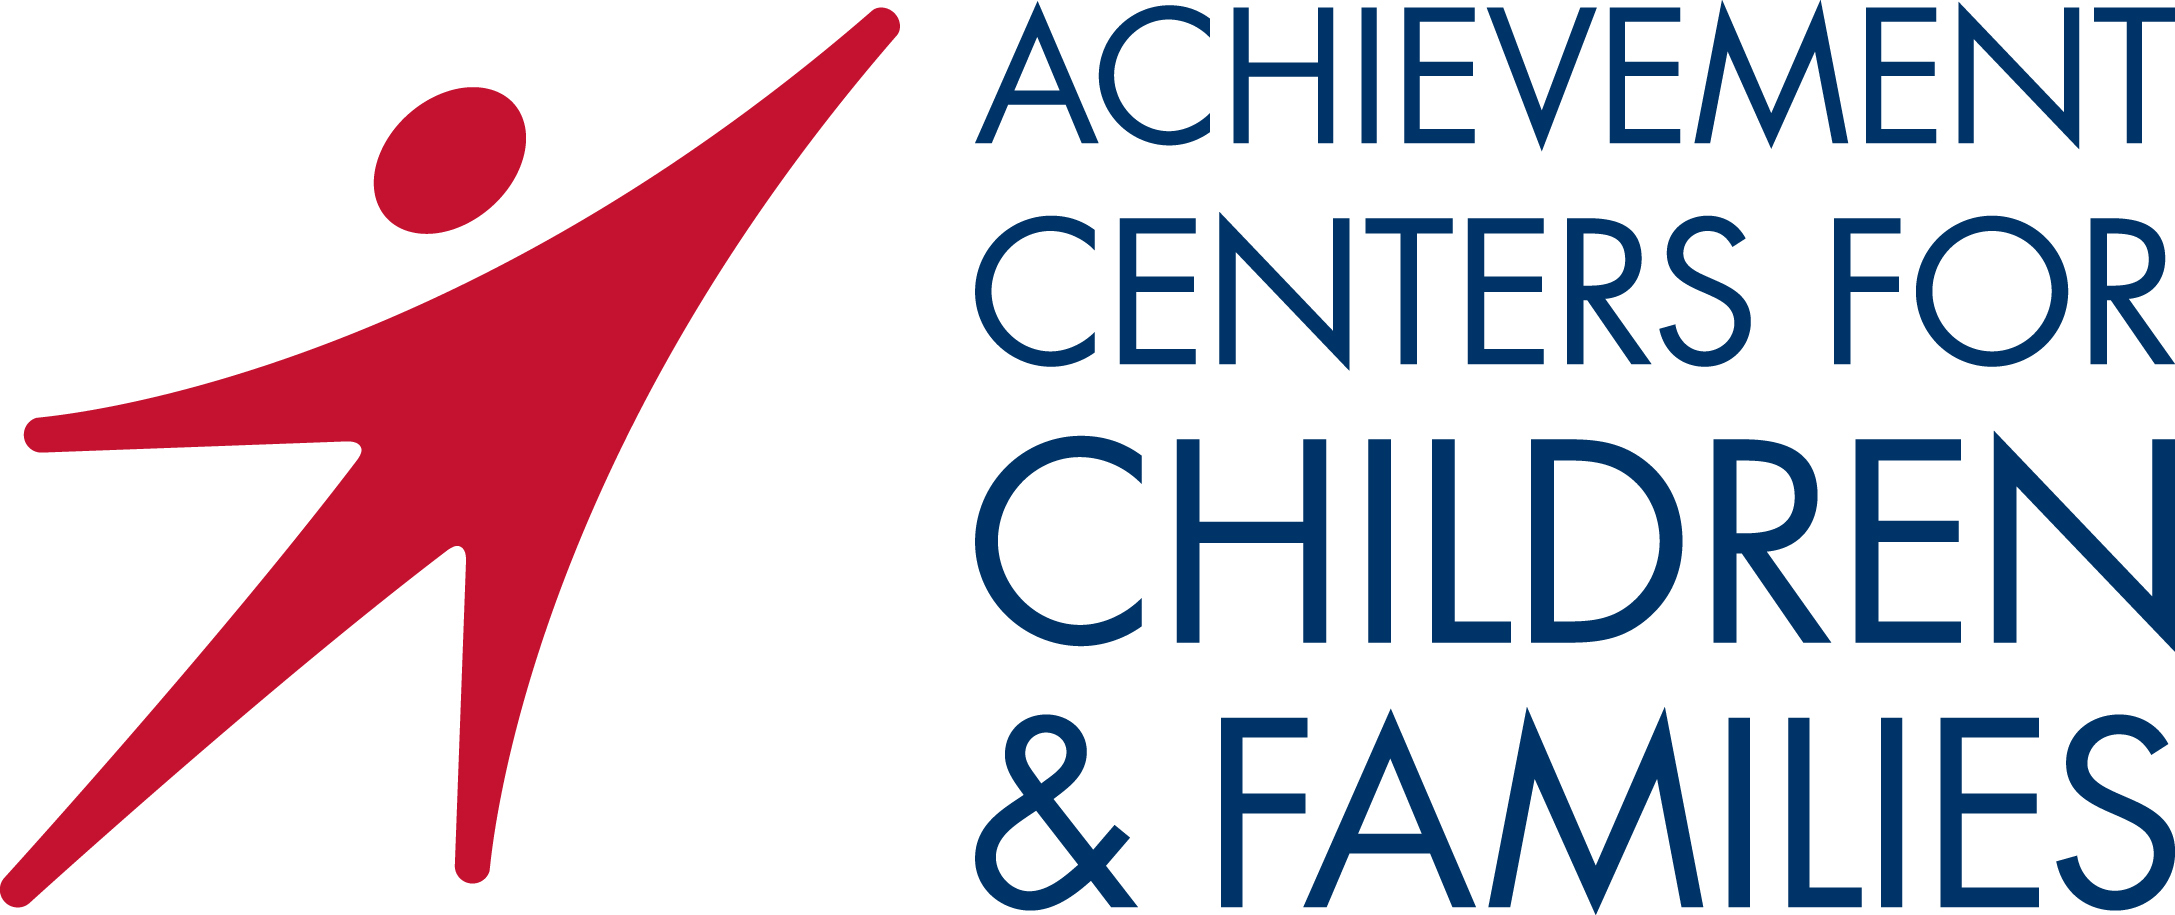 Achievement Centers for Children and Families